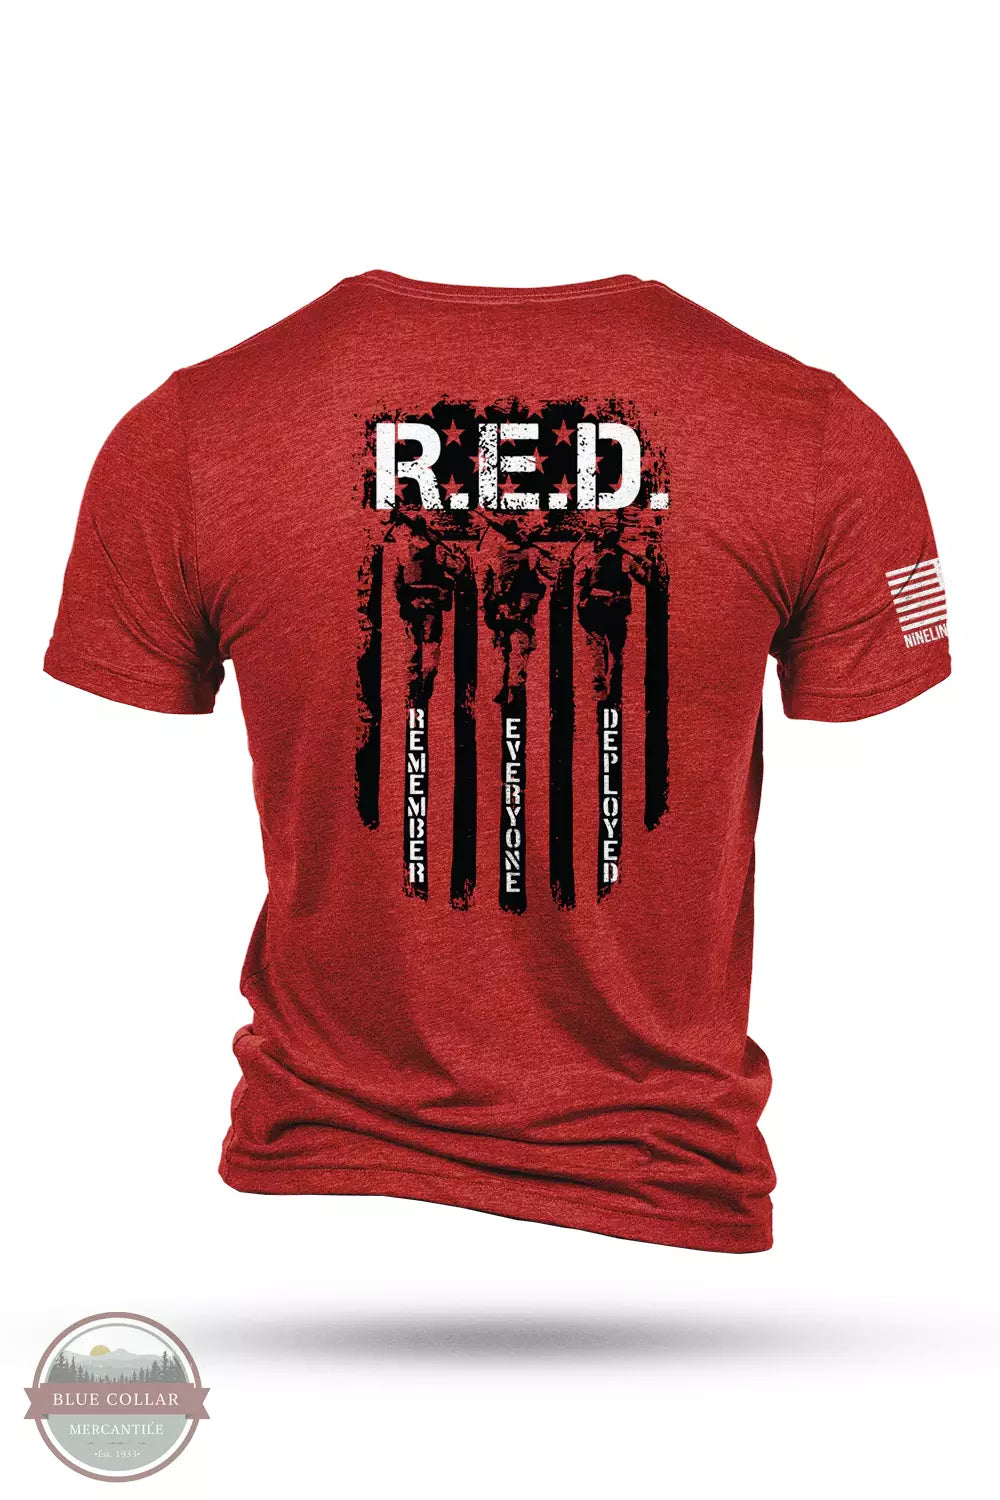 Nine Line RED-TSTRI-RED Remember Everyone Deployed Tri-Blend Short Sleeve T-Shirt in Red Back View